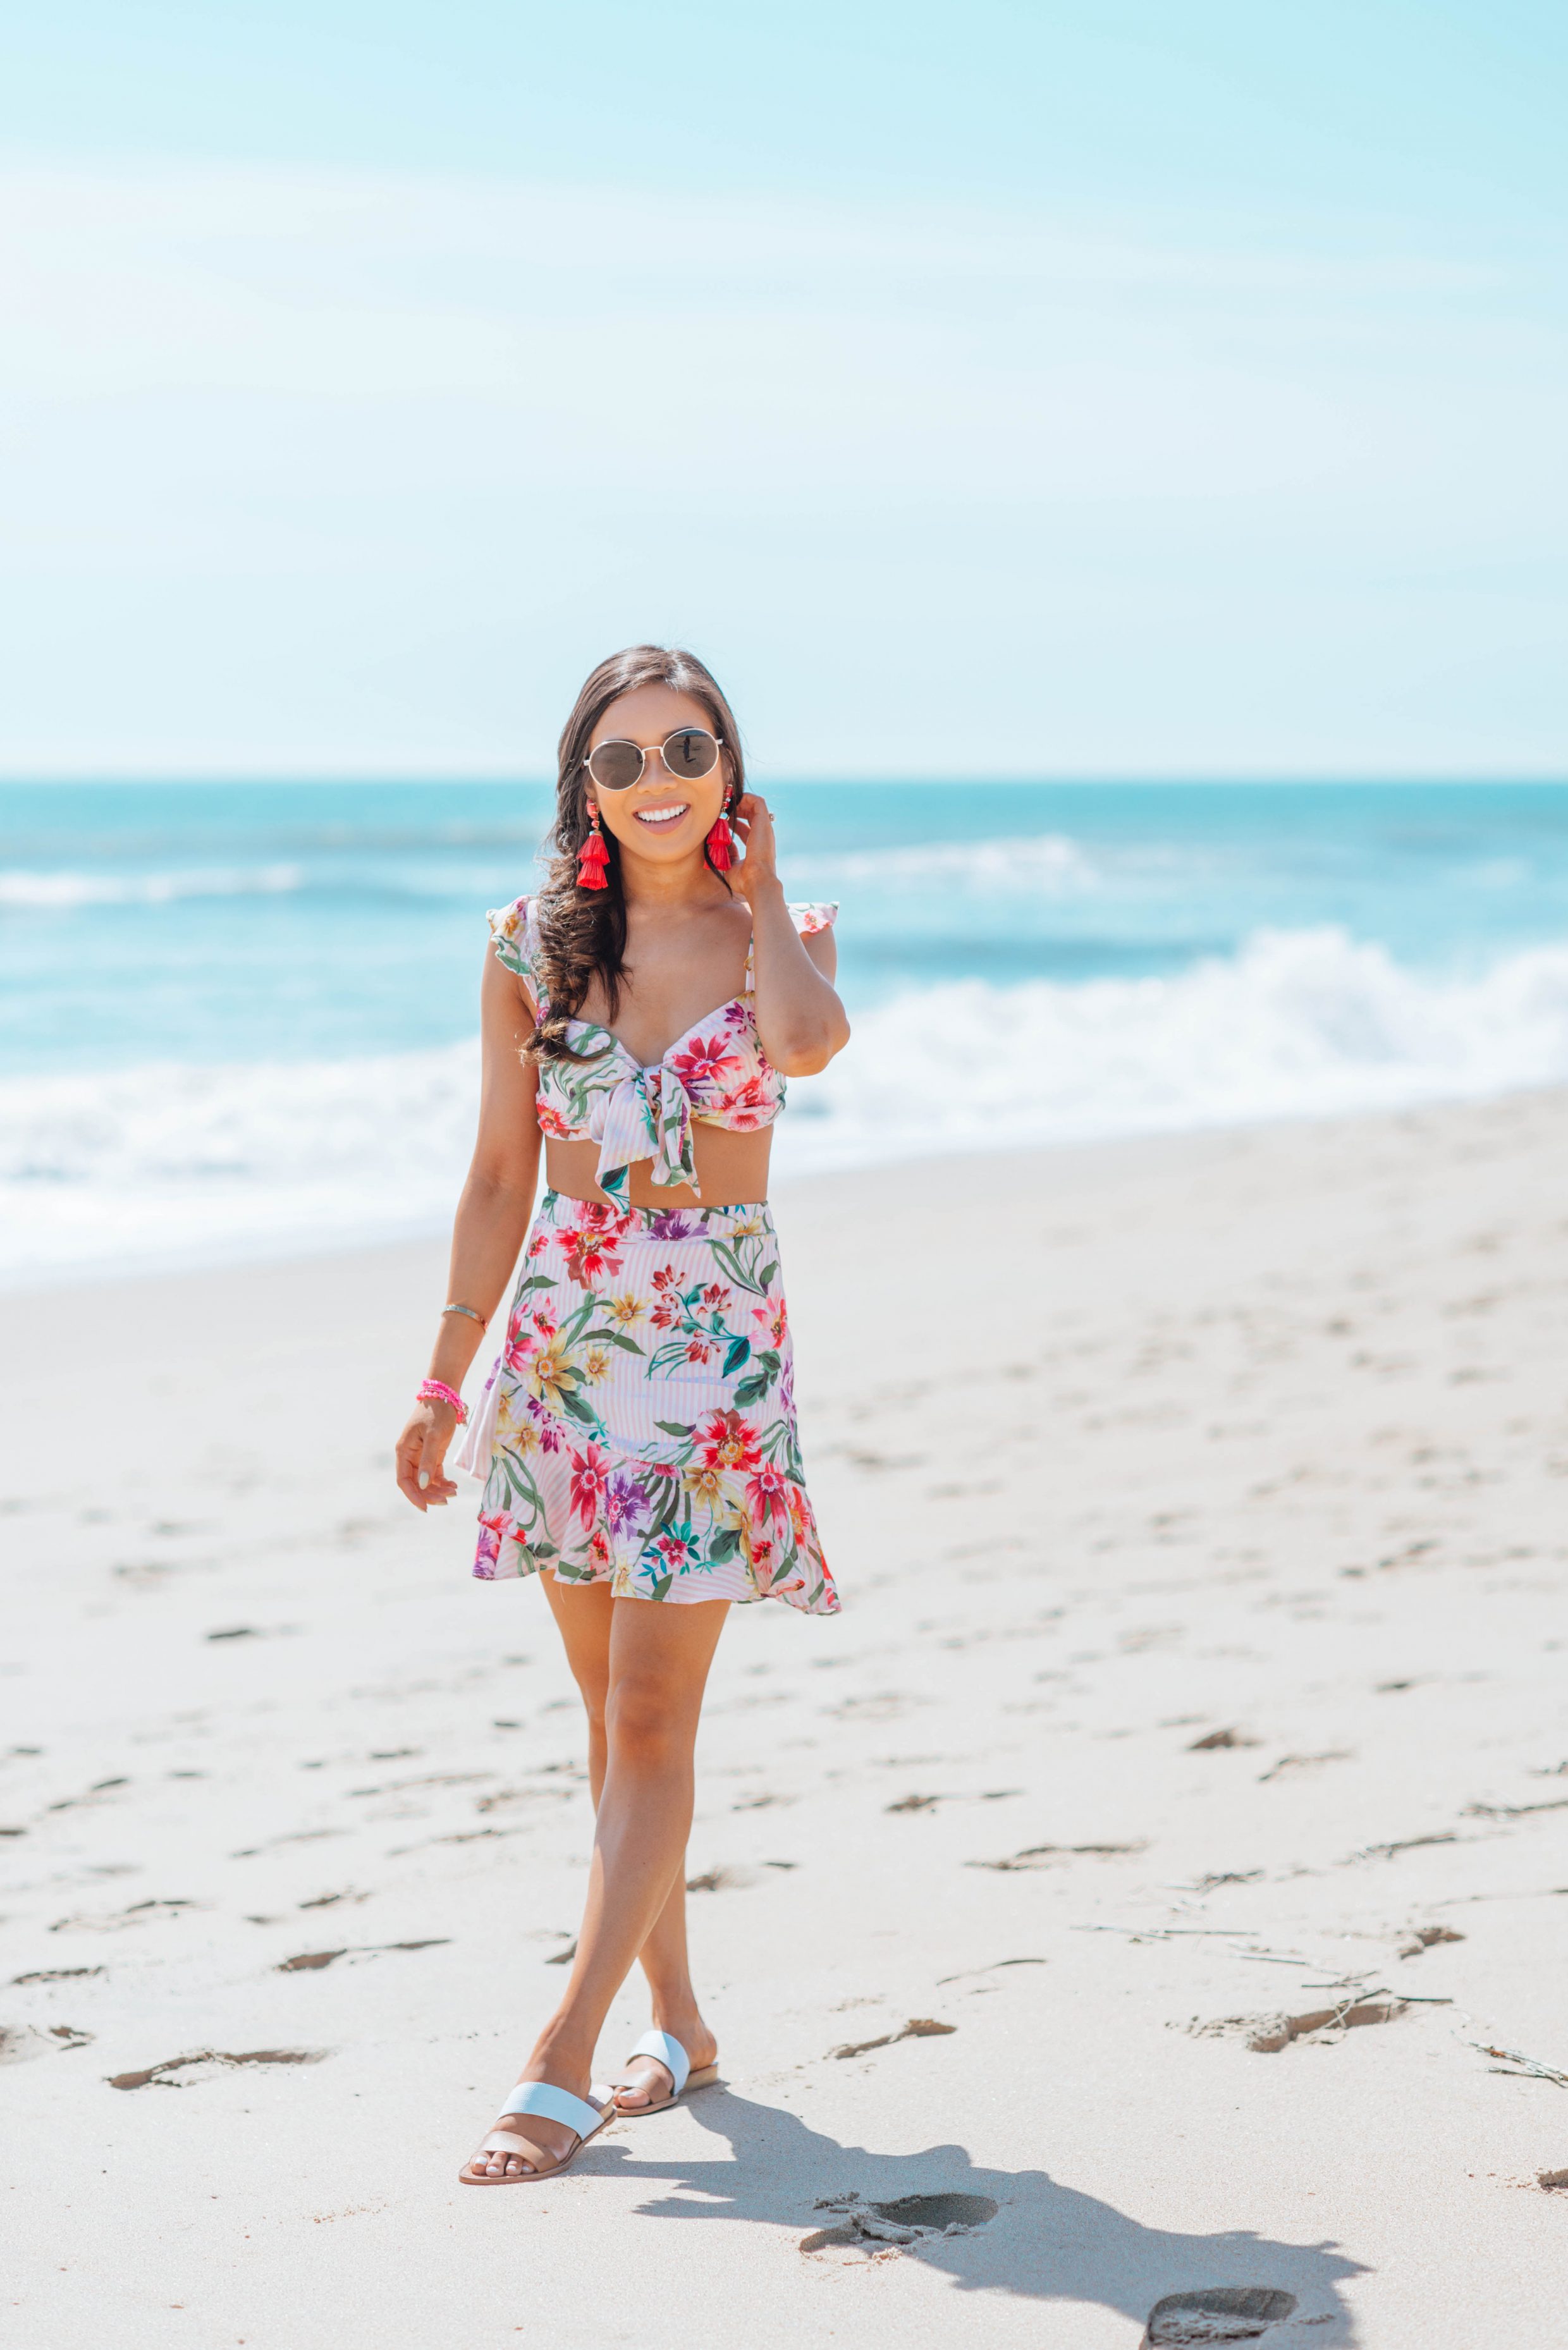 Blogger Hoang-Kim wears a floral two piece set with tassel earrings and a fishtail braid for the beach